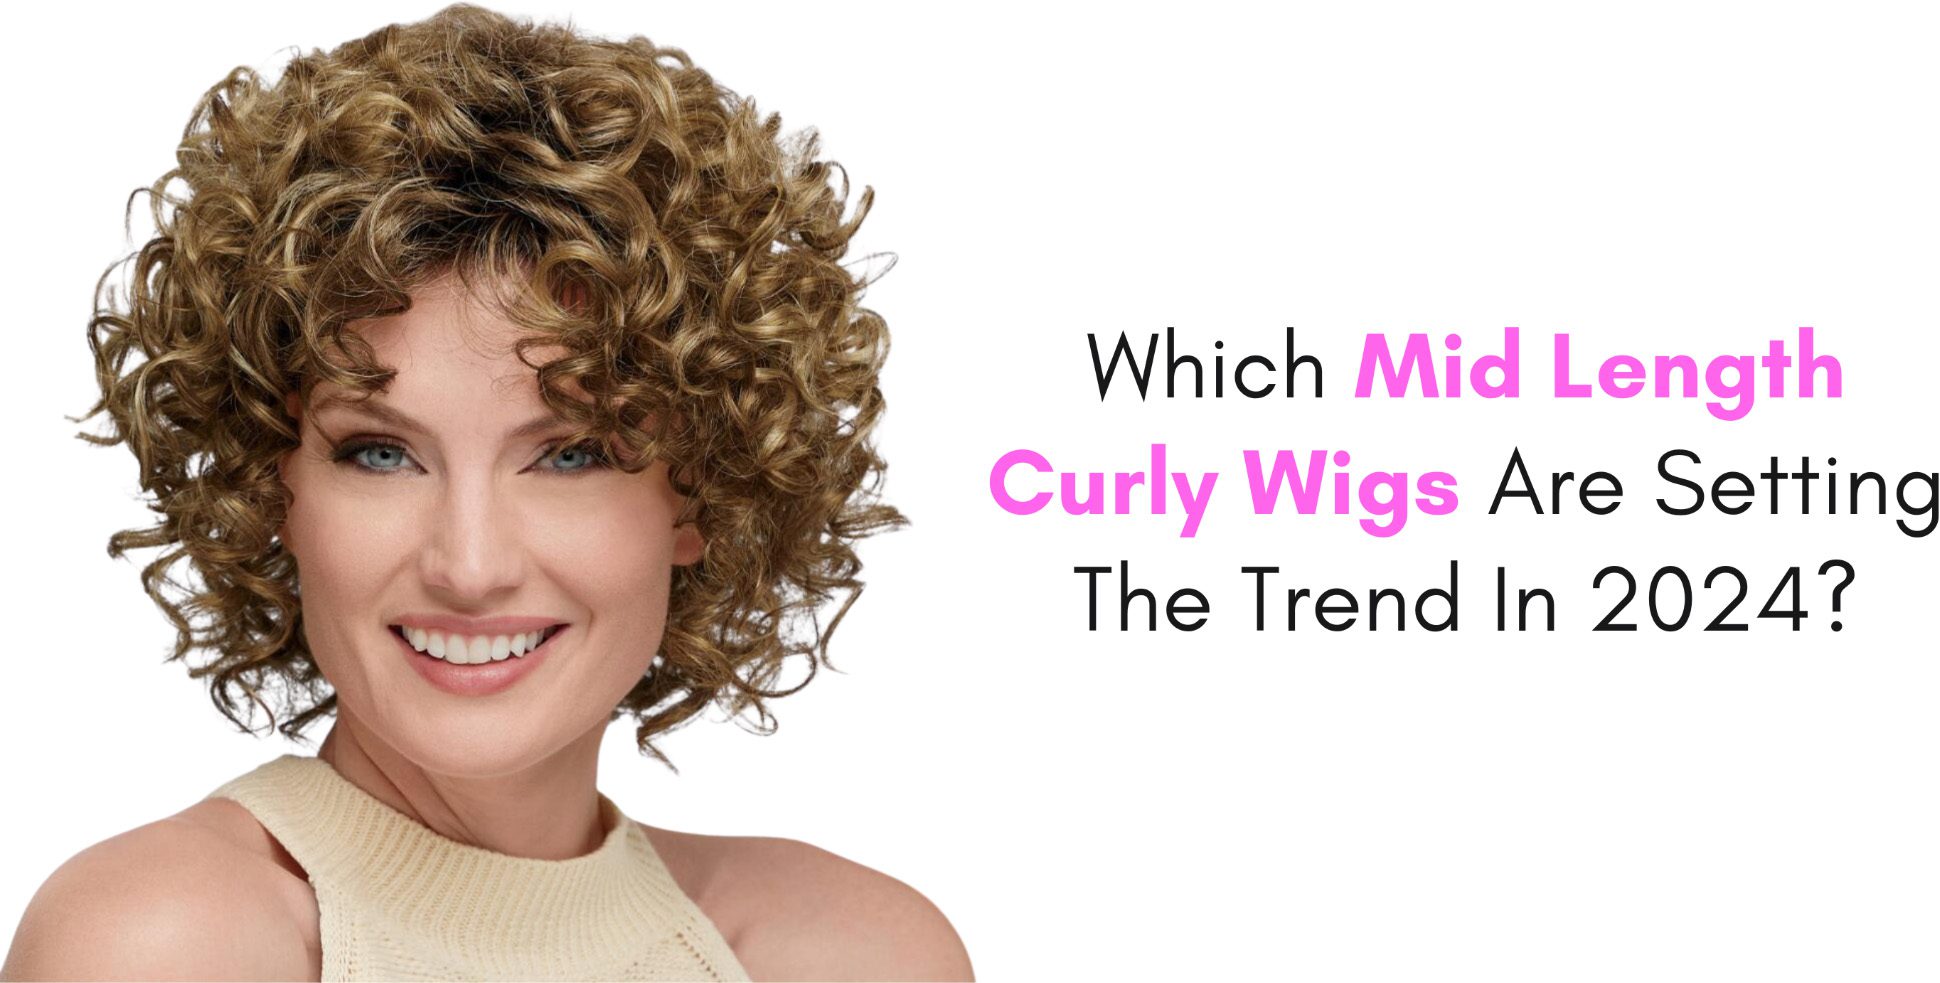 Which Mid Length Curly Wigs Are Setting The Trend In 2024?